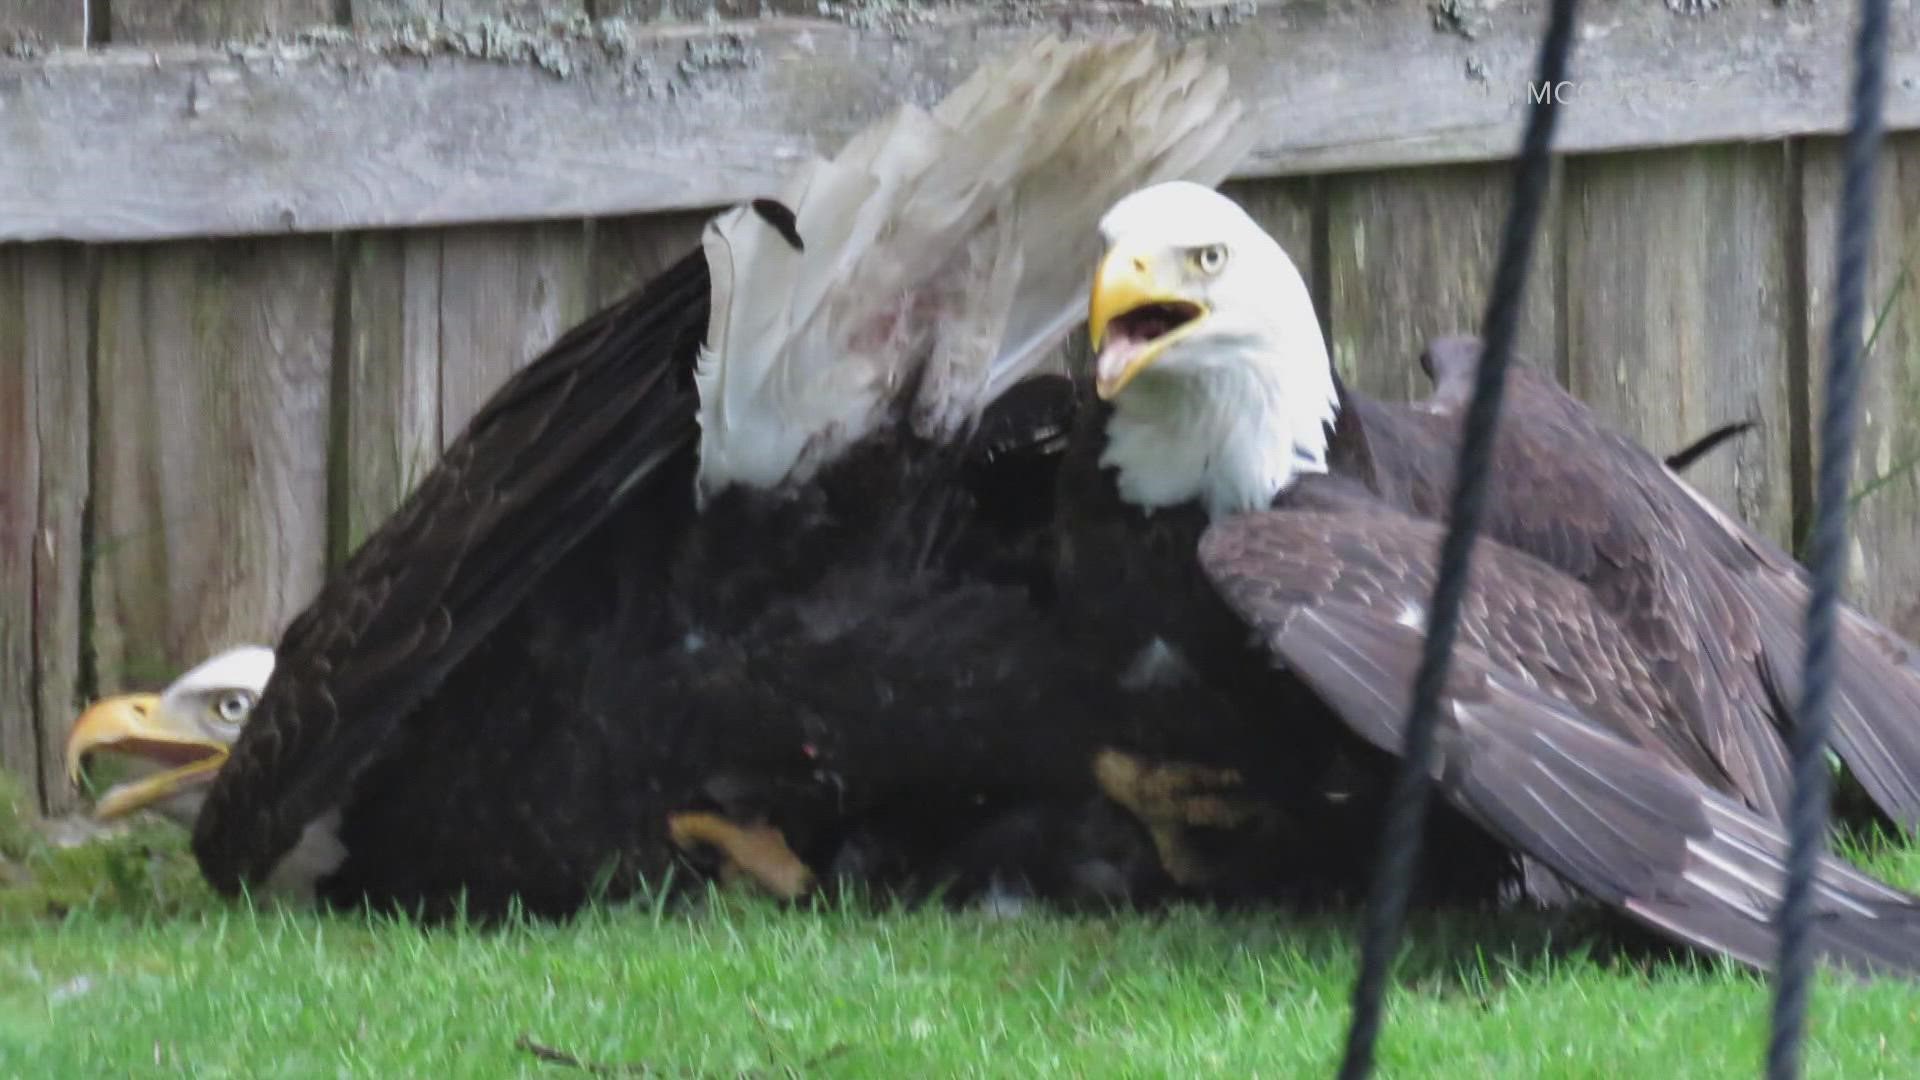 A PAWS representative said it is normal for bald eagles to be caught in a fight for anywhere from three to five hours.